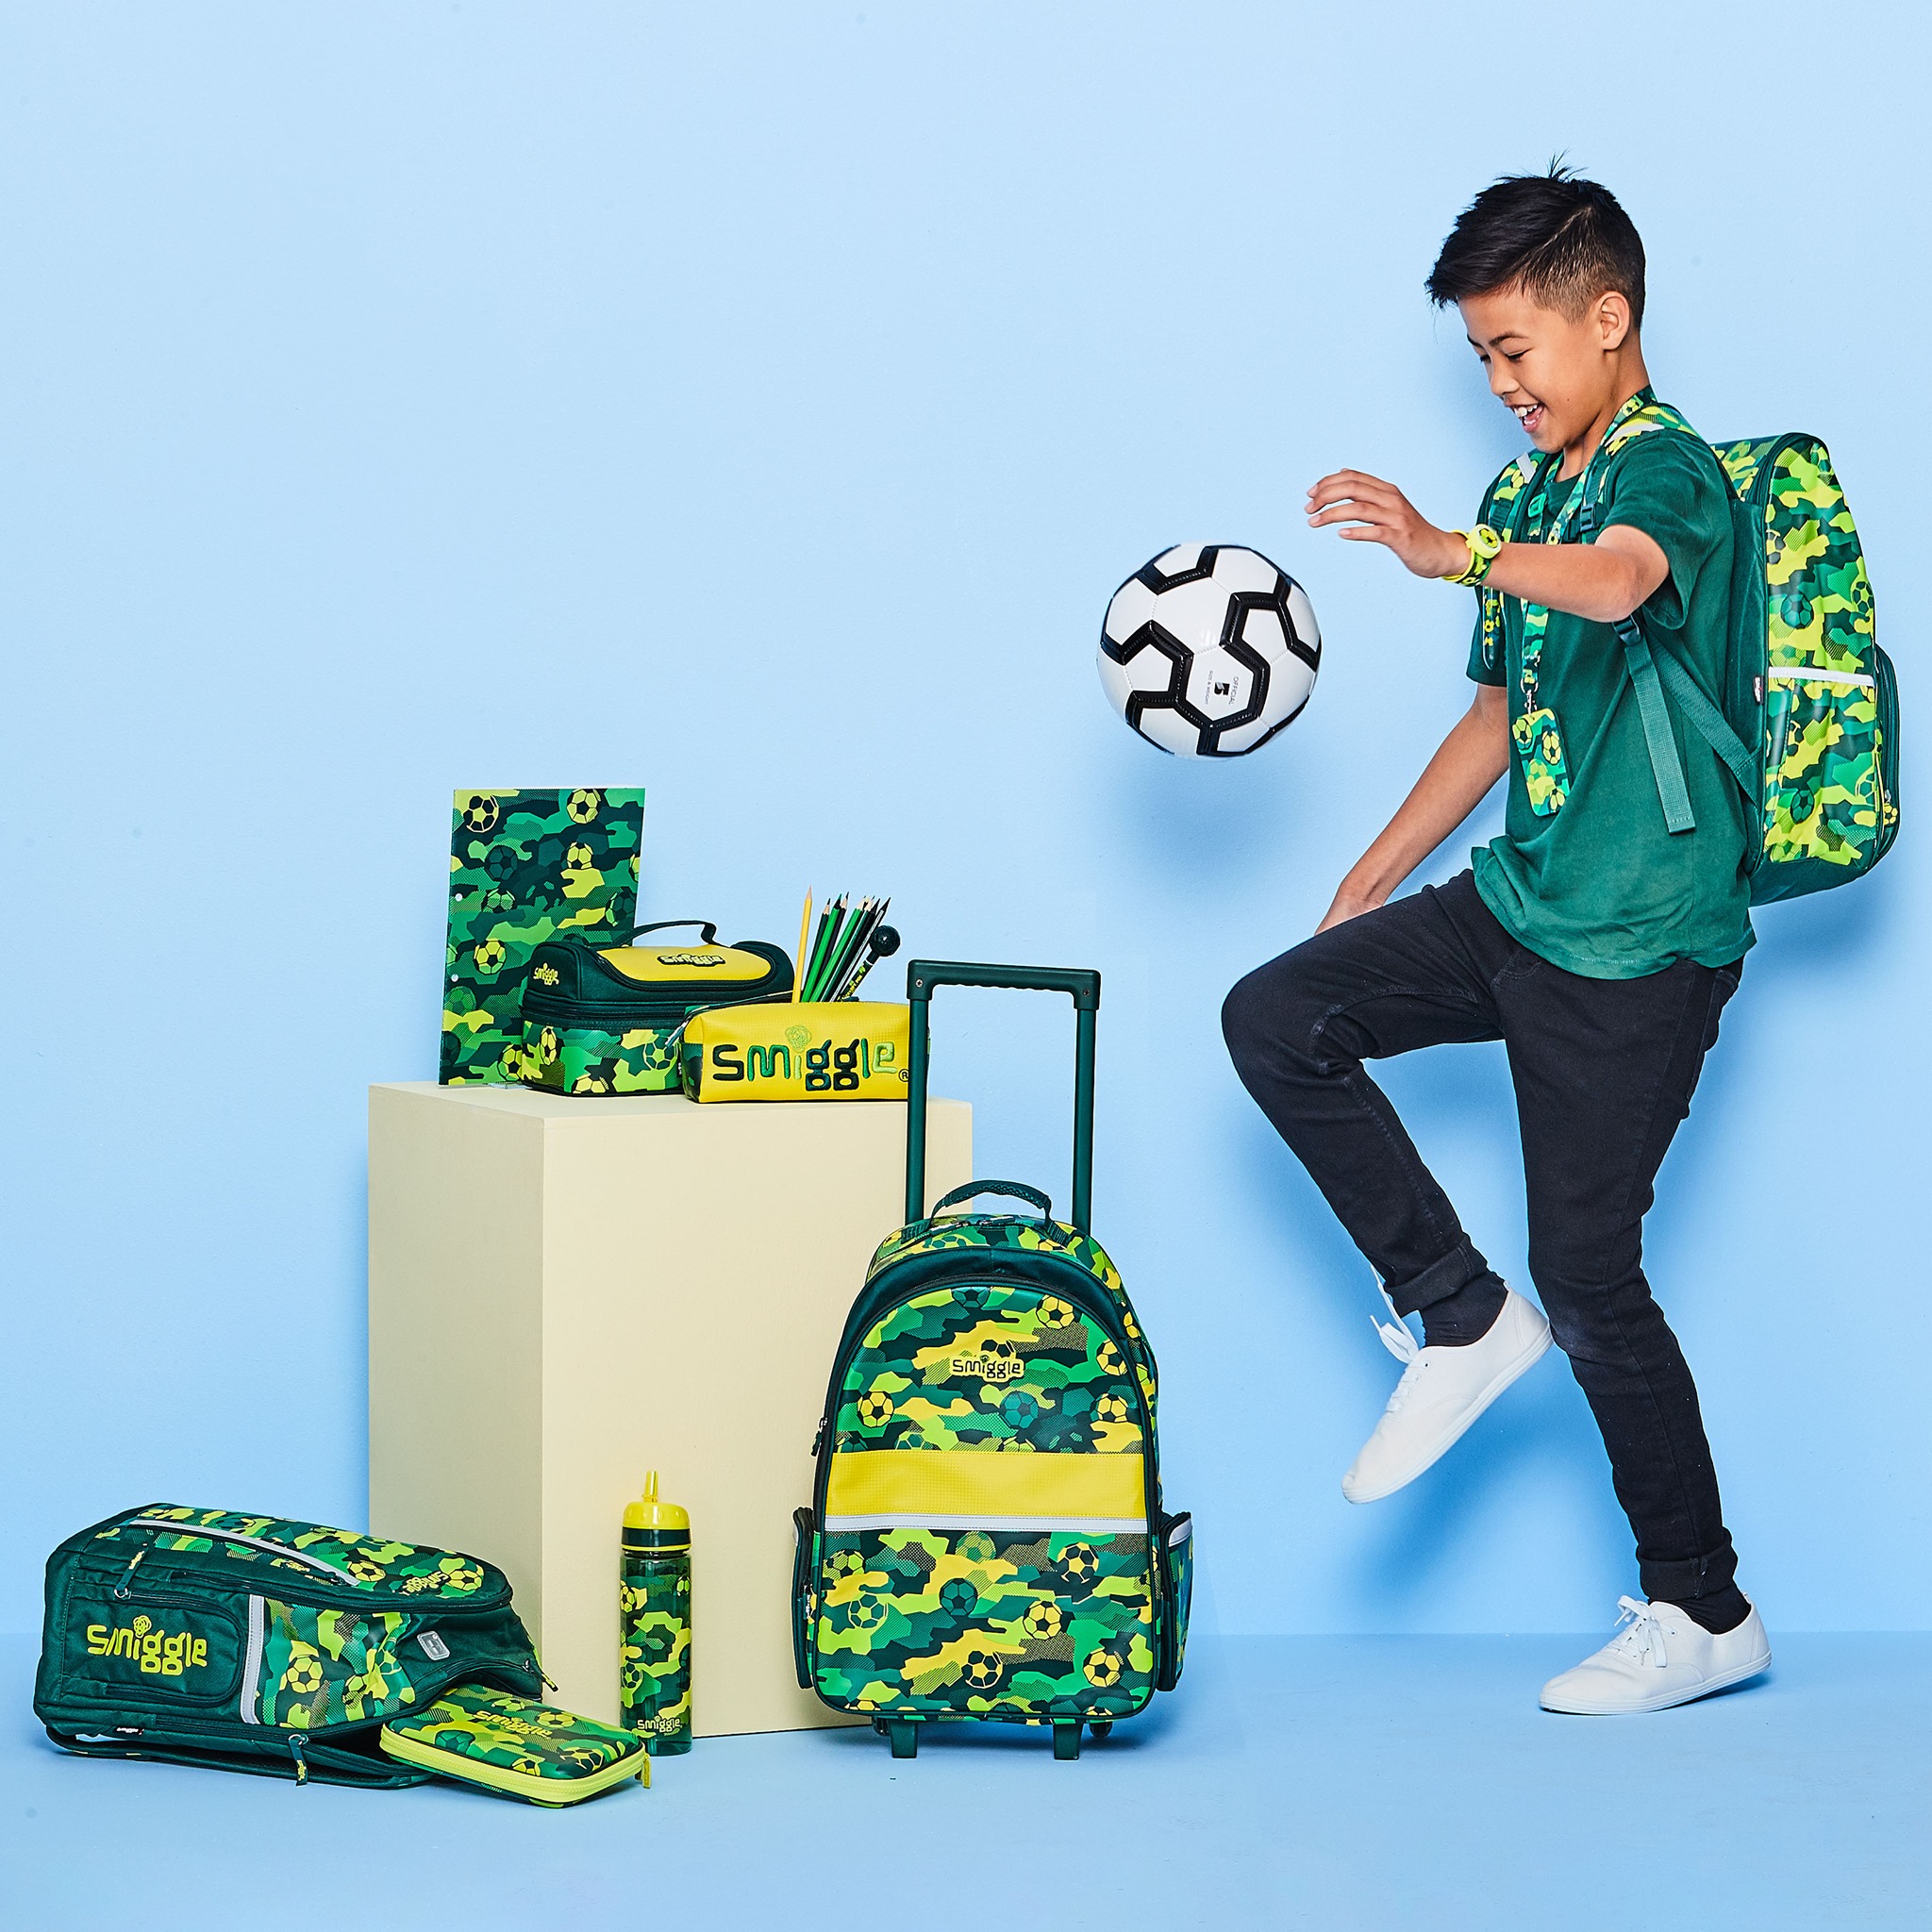 kick goals with our seek collection!⚽😄with a camo soccer print that football fans will just love! shop the full range instore now 🌟